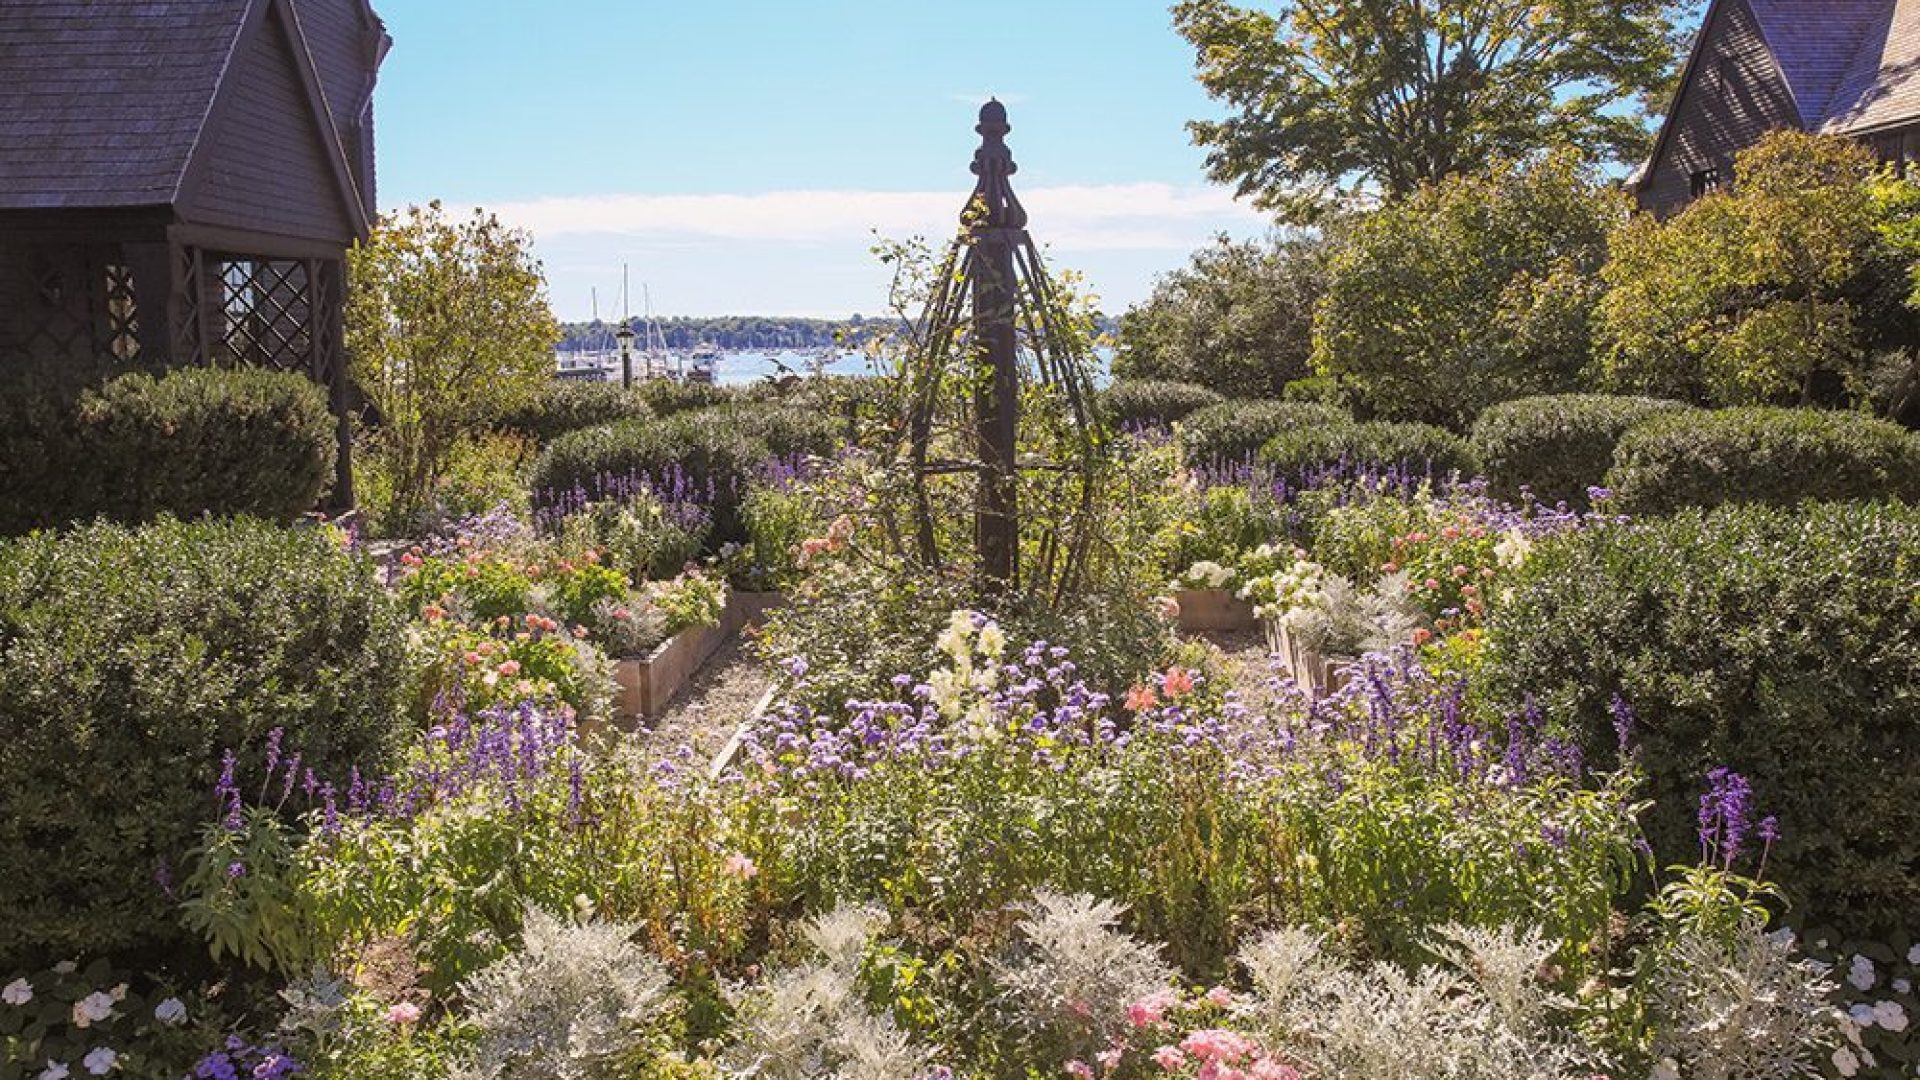 Flower garden located on the side of the House of the Seven Gables.